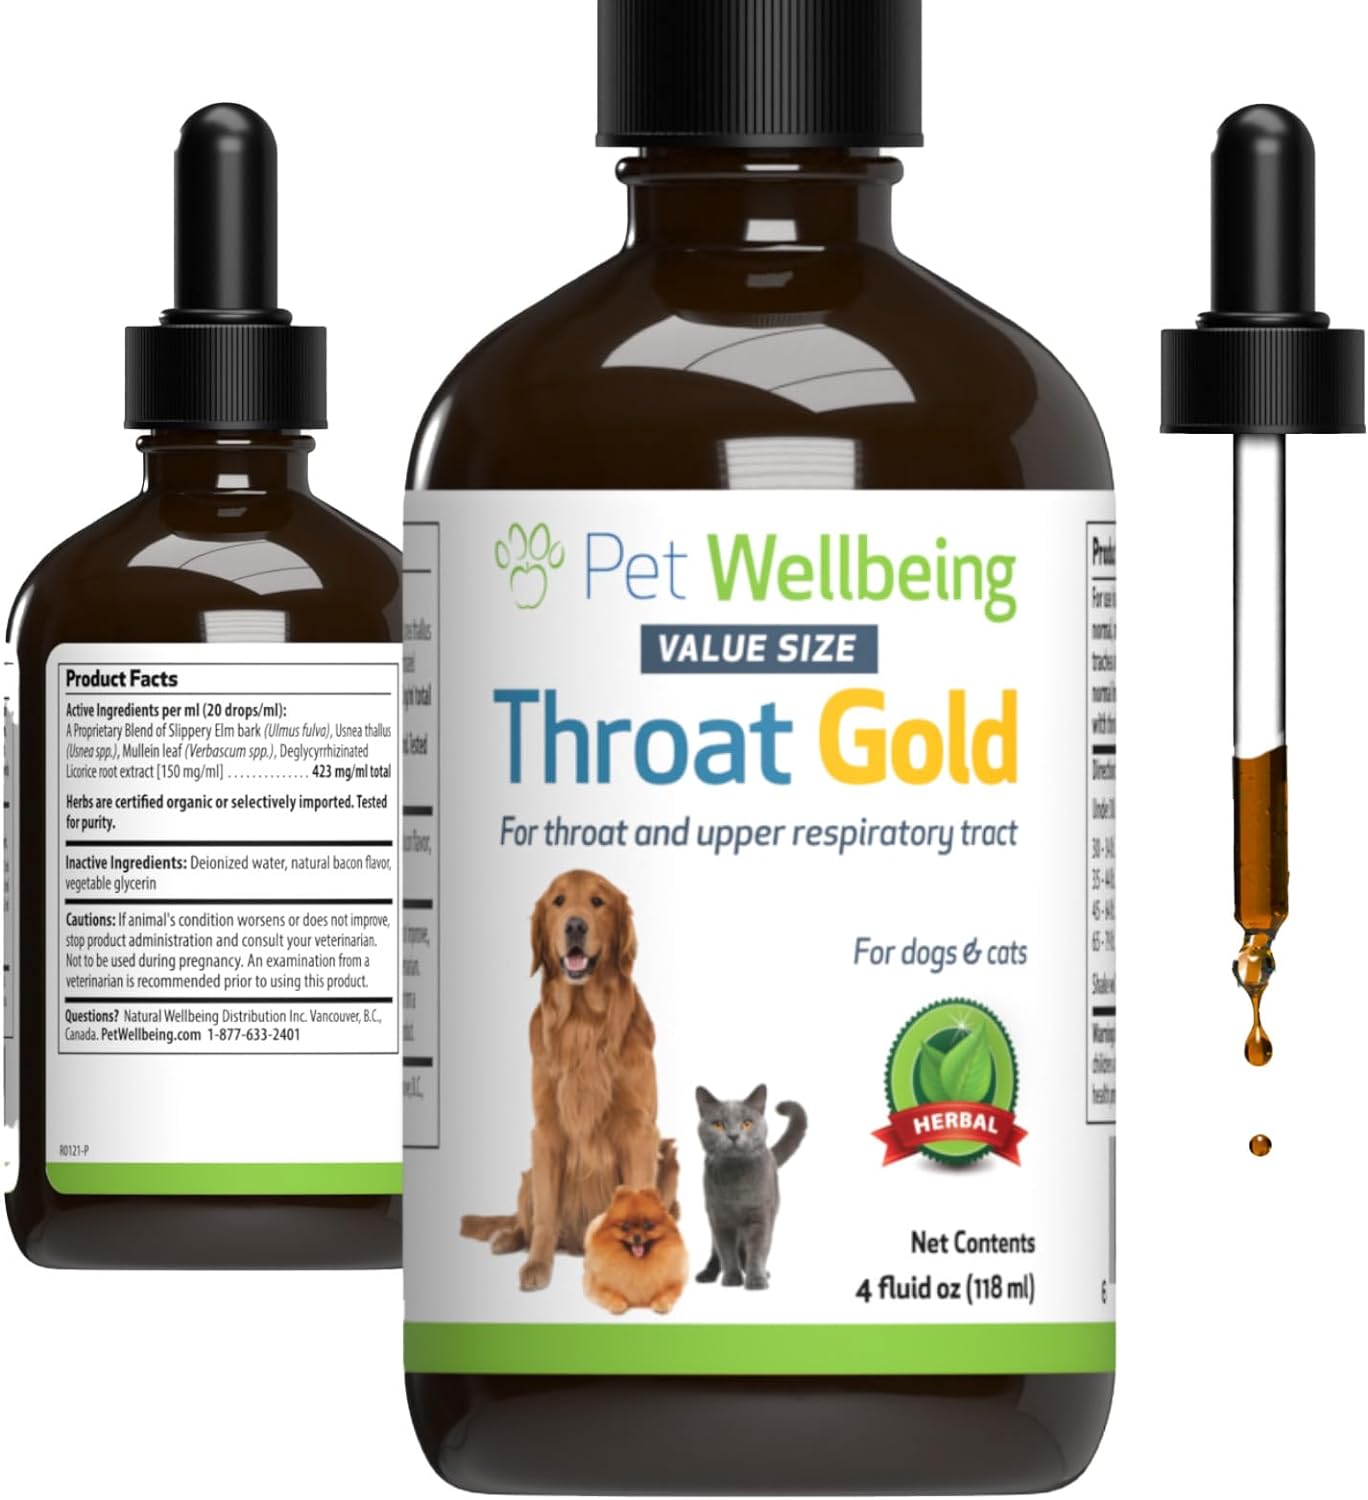 Pet Wellbeing Throat Gold for Dogs - Vet-Formulated - Soothes Kennel Cough Discomfort, Throat Hoarseness, Leash Strain - Natural Herbal Supplement 4 oz (118 ml)